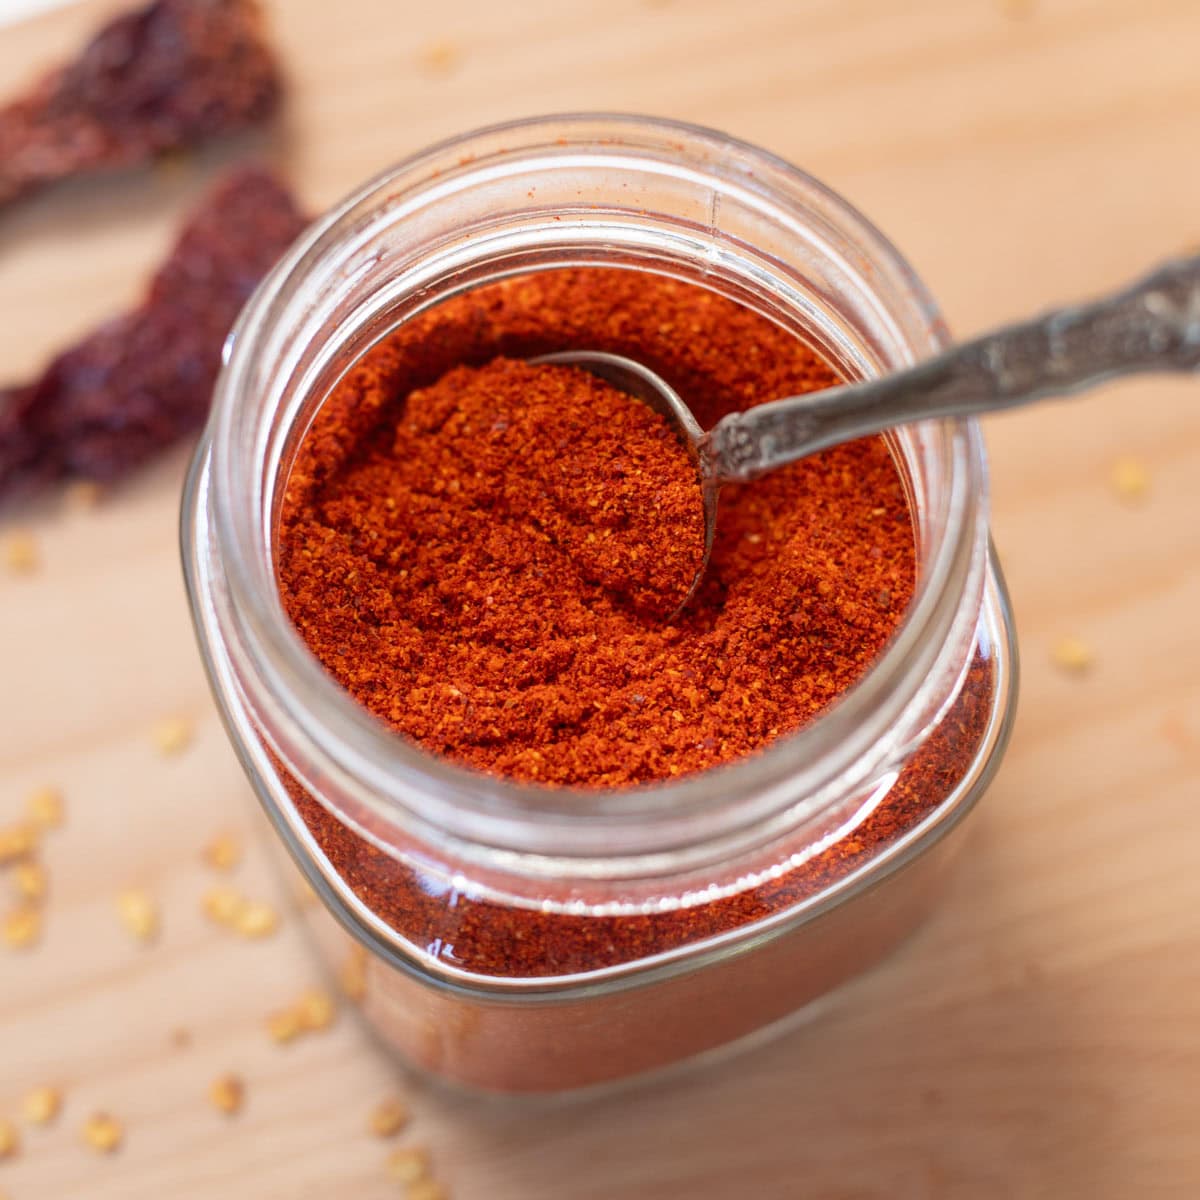 close-up shot of red chili powder in a jar